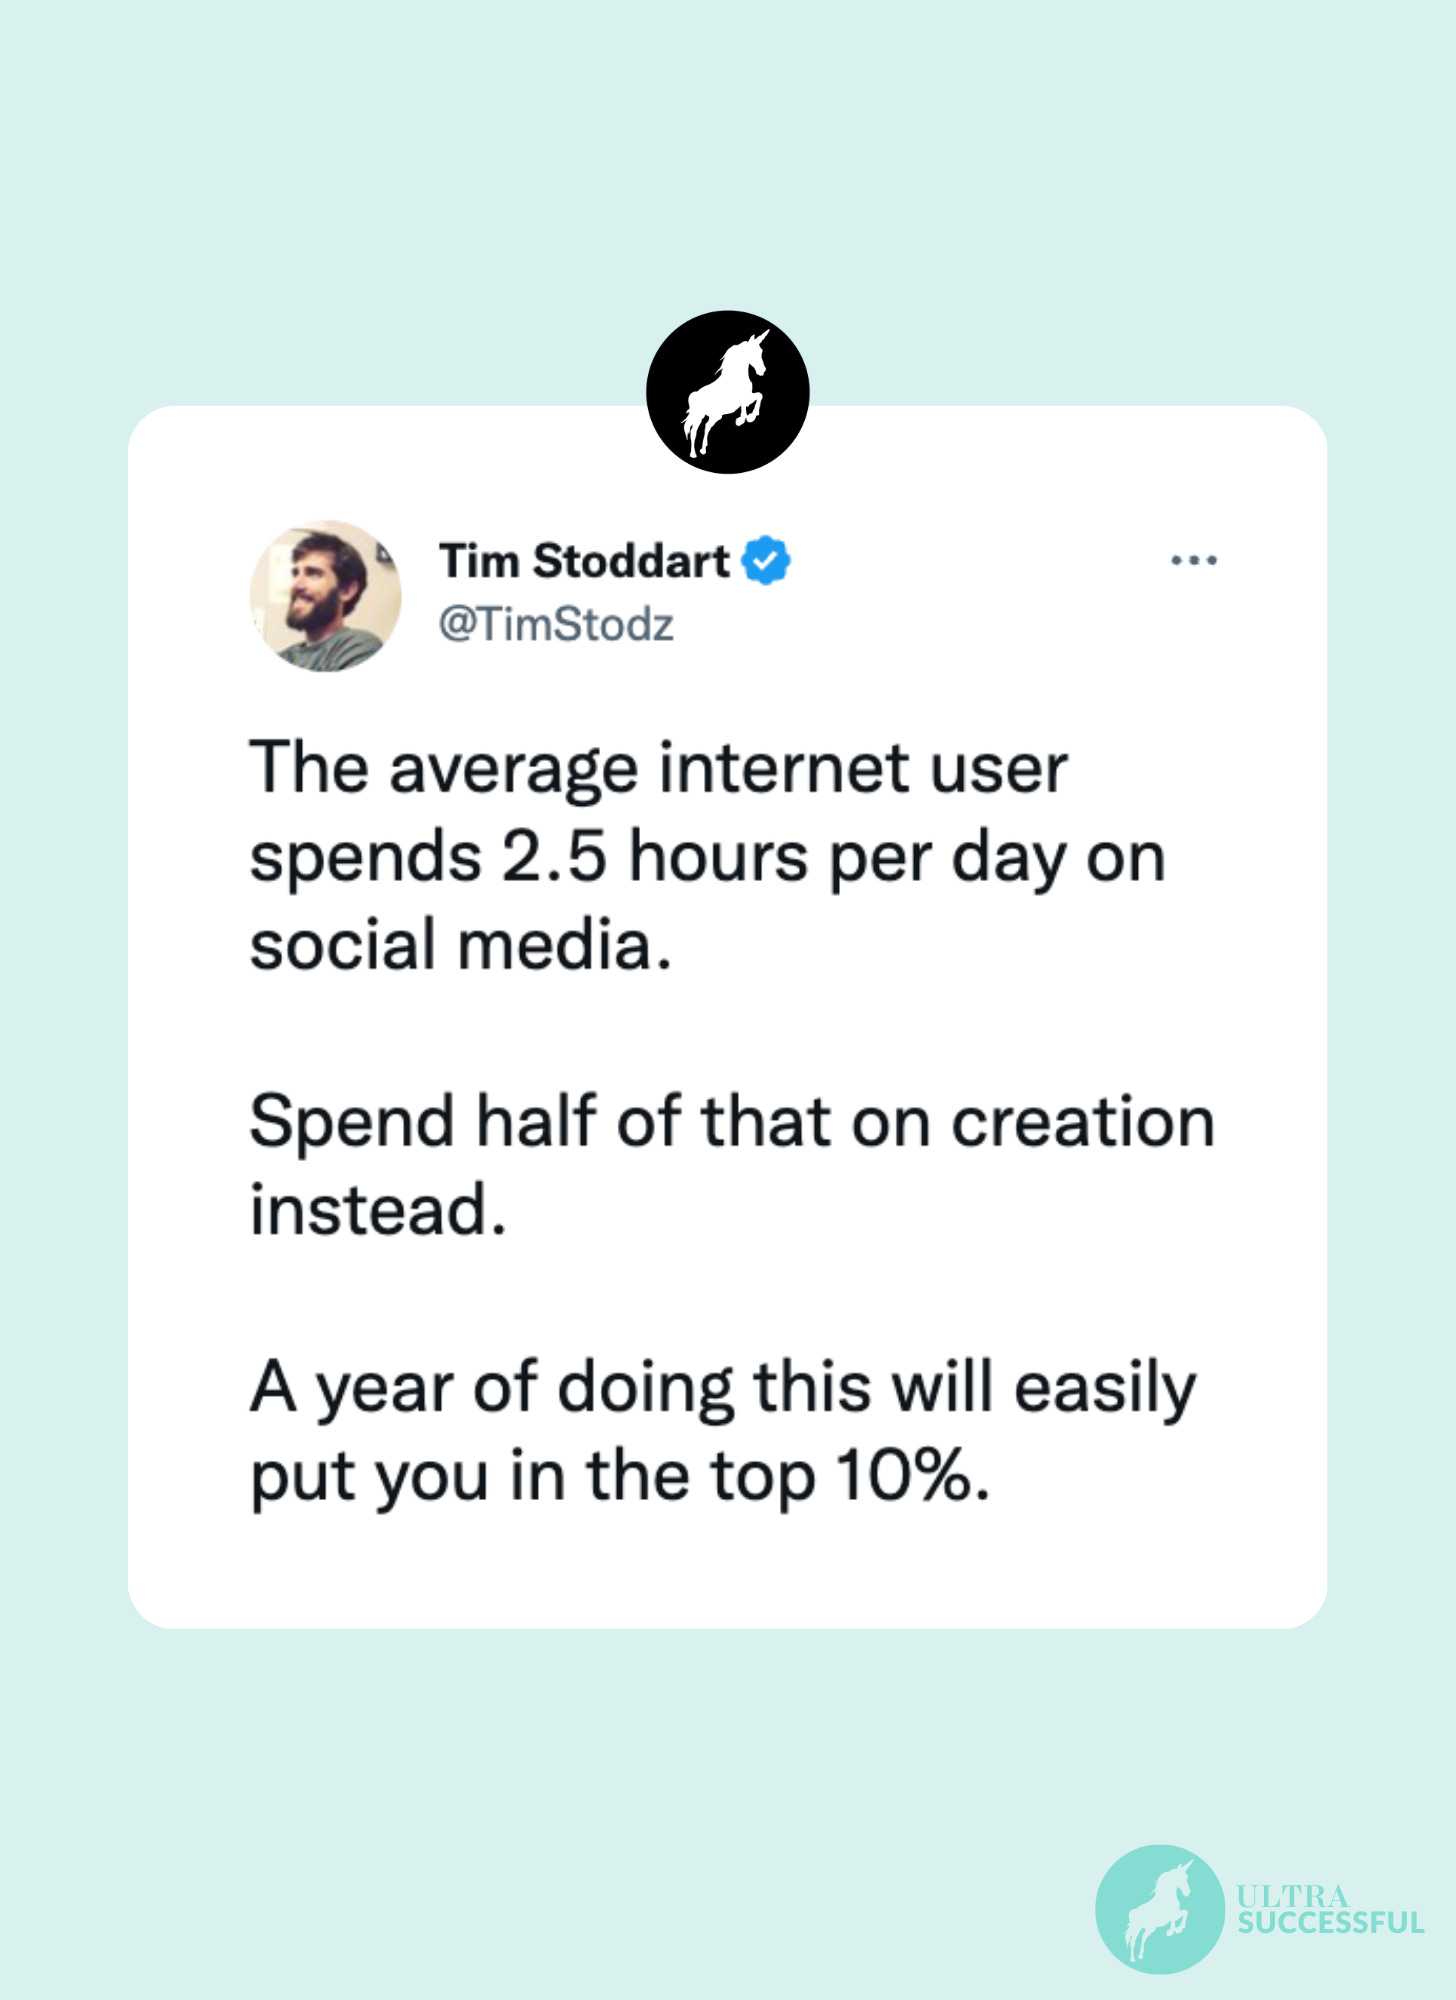 @TimStodz: The average internet user spends 2.5 hours per day on social media.  Spend half of that on creation instead.  A year of doing this will easily put you in the top 10%.